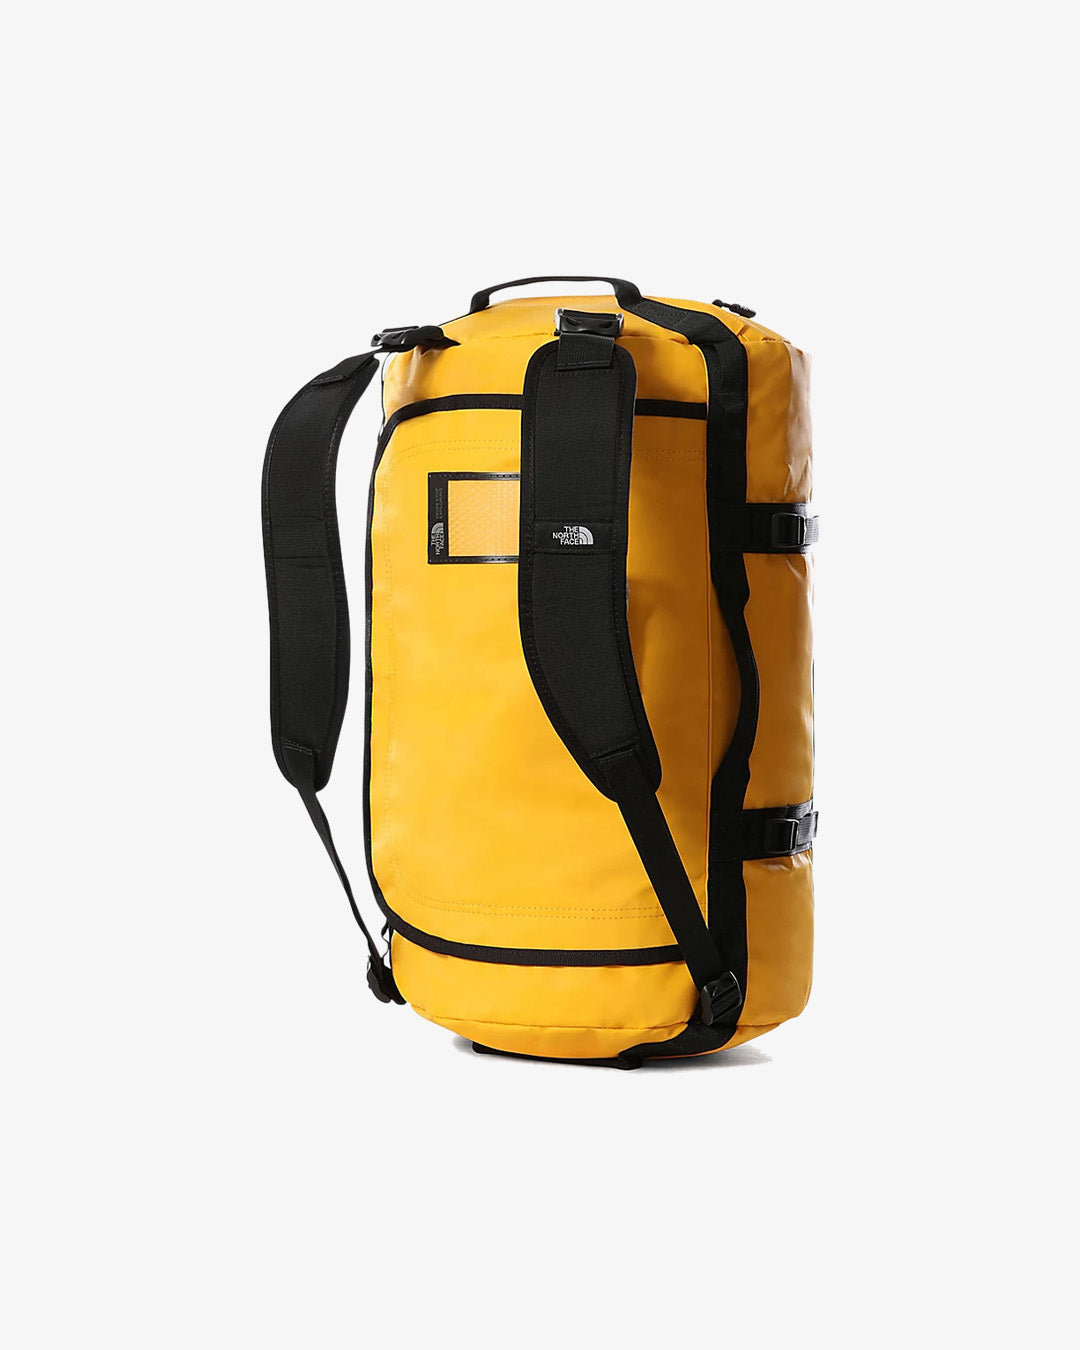 The North Face Duffel Base Camp - S